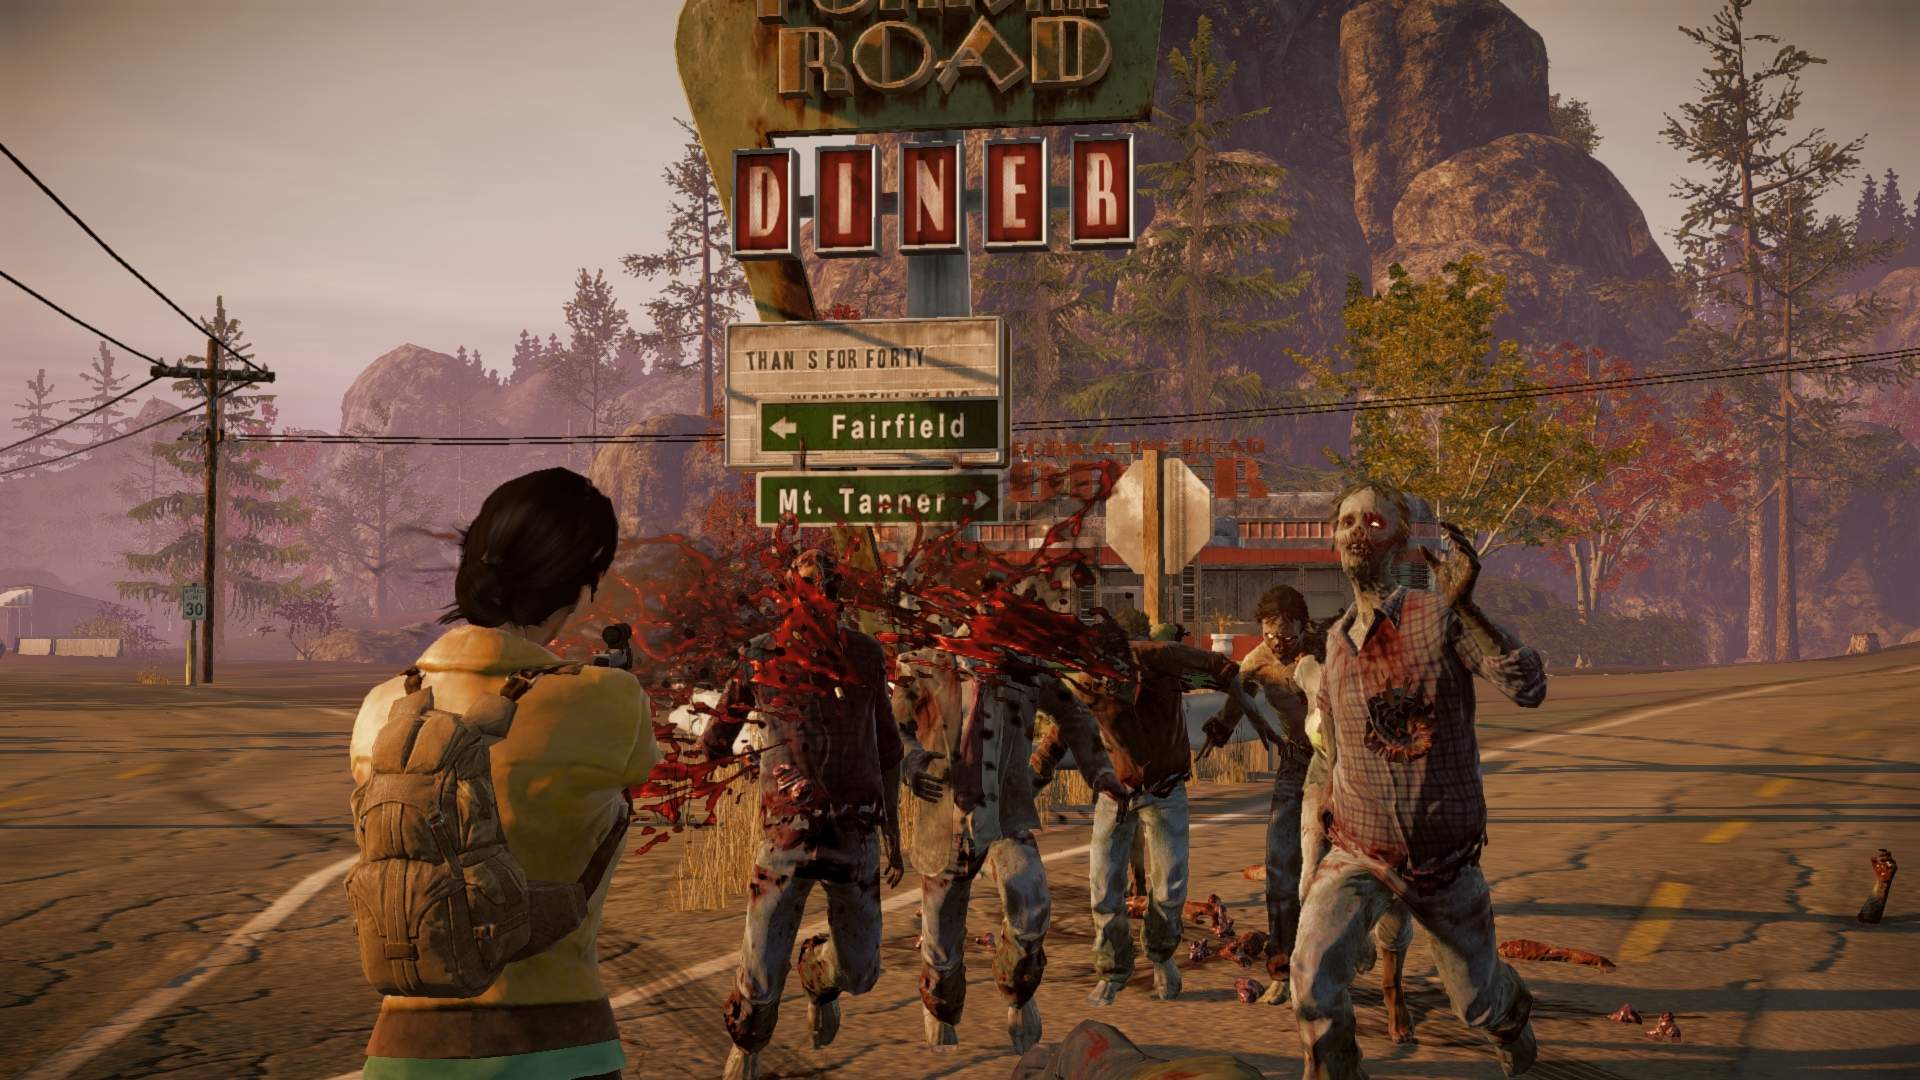 State of decay требования. State of Decay Xbox 360. Игра State of Decay 2. State of Decay 1.